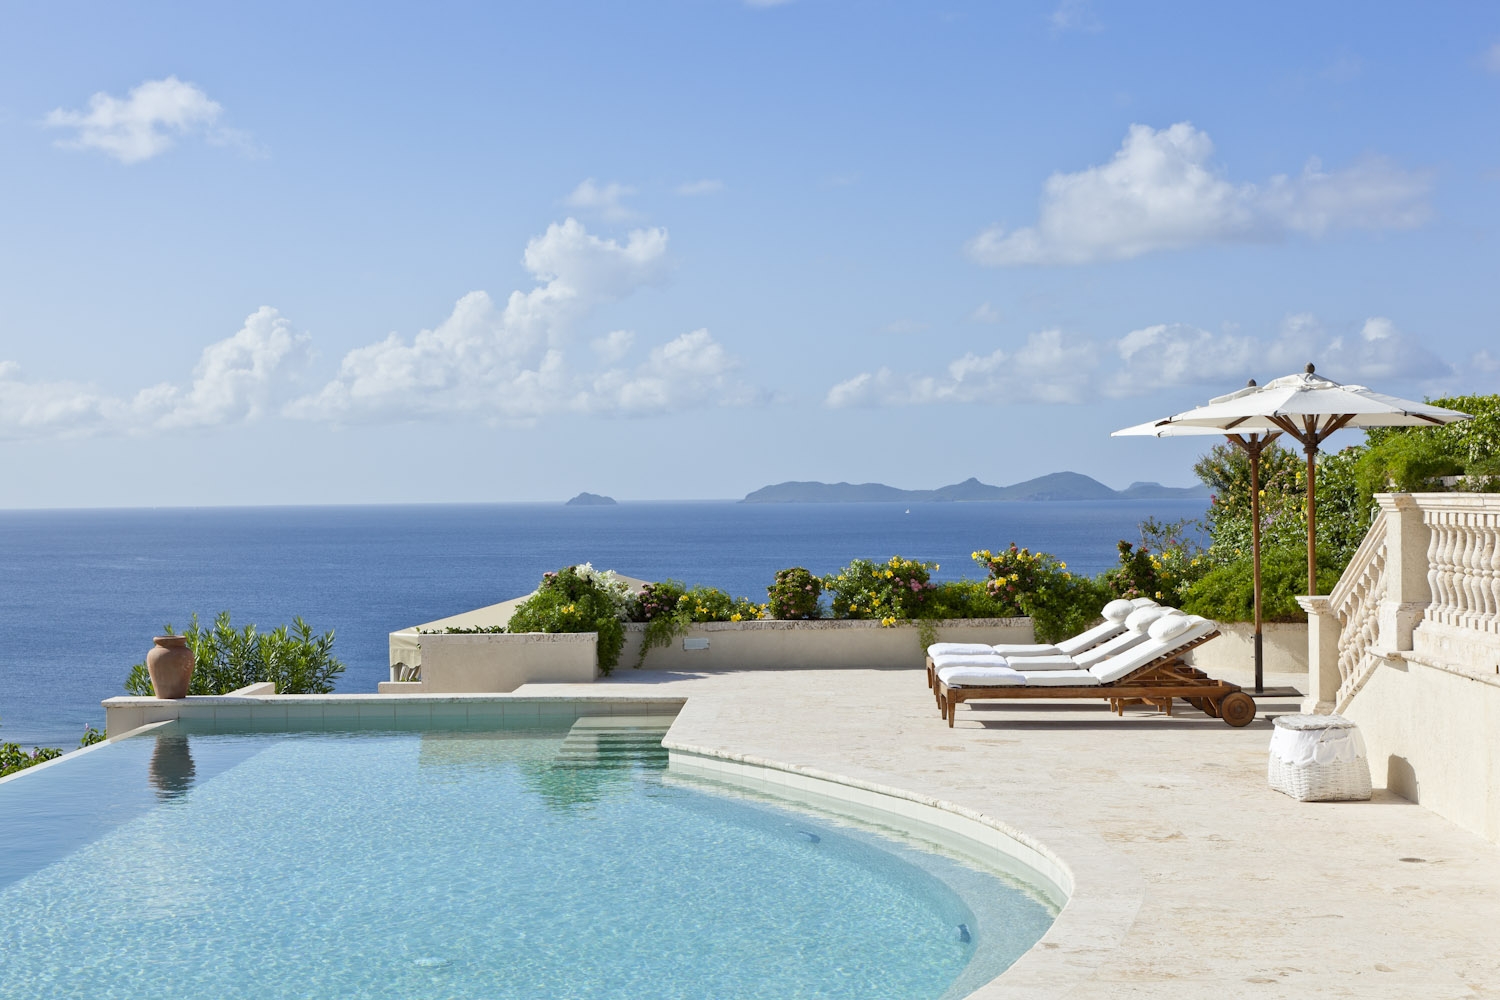 View from the swimming pool of Plantation House, Mustique